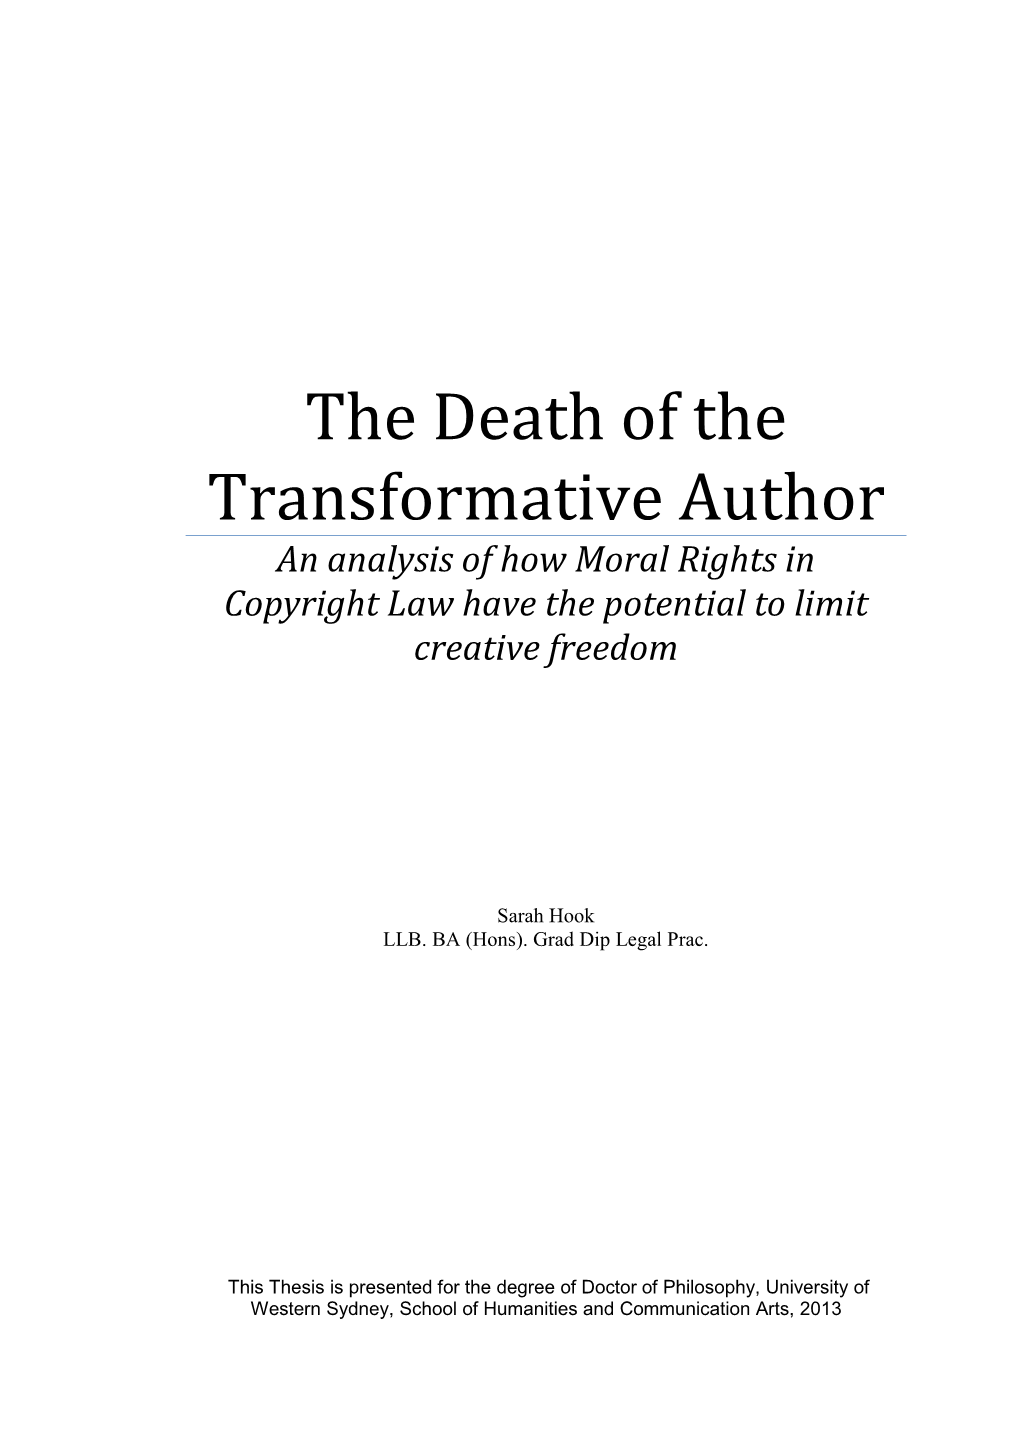 The Death of the Transformative Author an Analysis of How Moral Rights in Copyright Law Have the Potential to Limit Creative Freedom